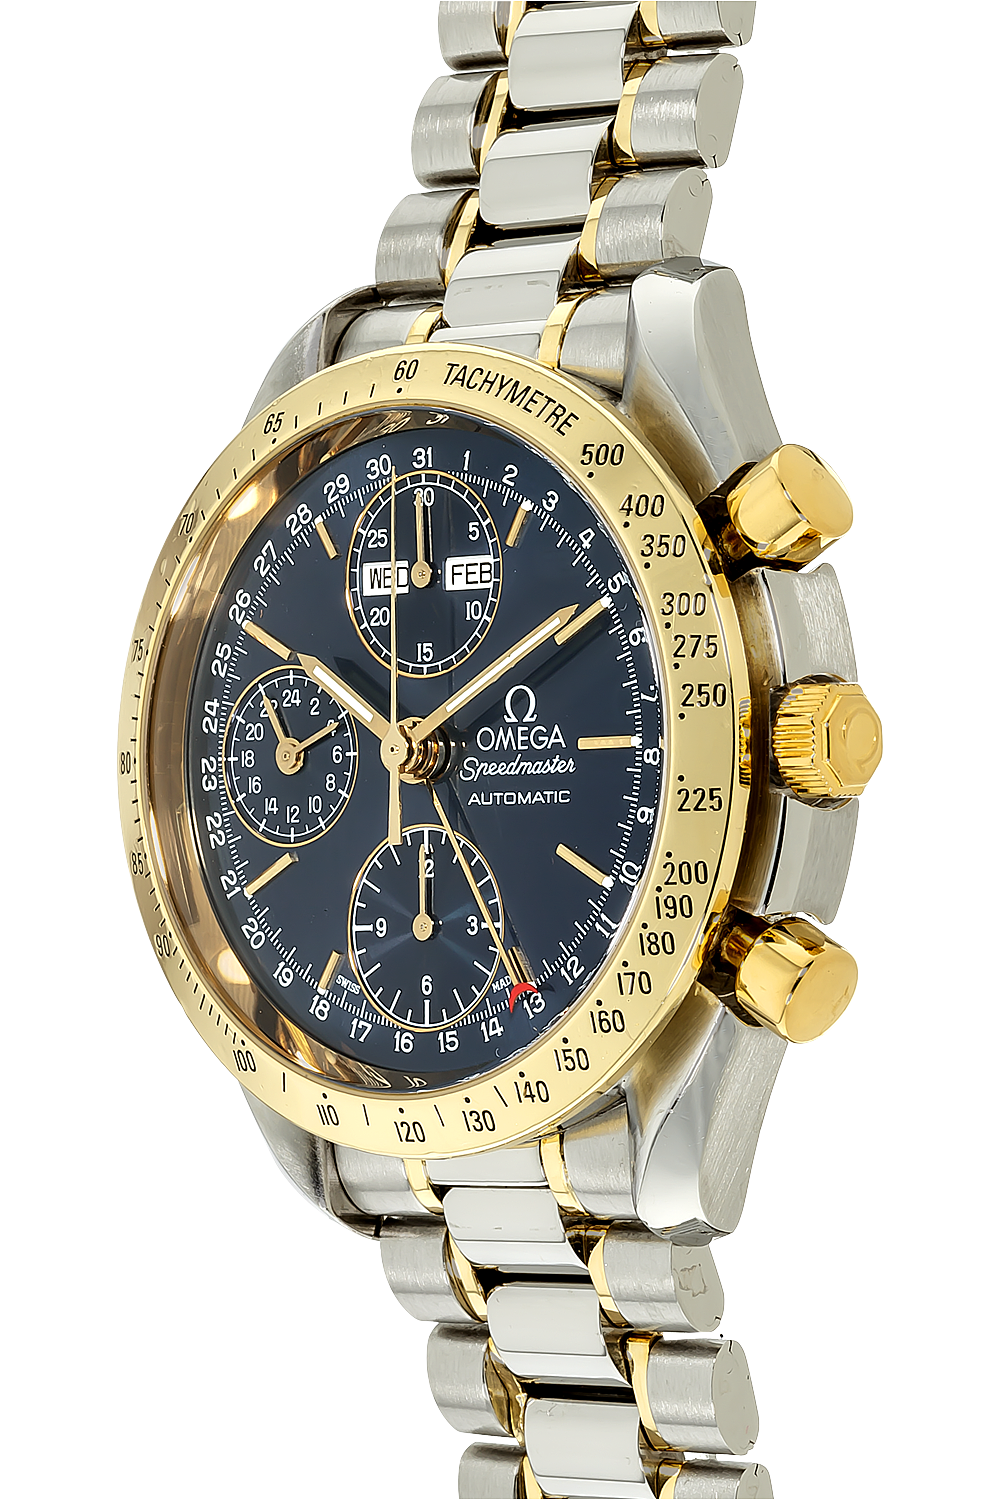 Pre-Owned Omega Speedmaster Day-Date Chronograph Automatic (3321.80.00)